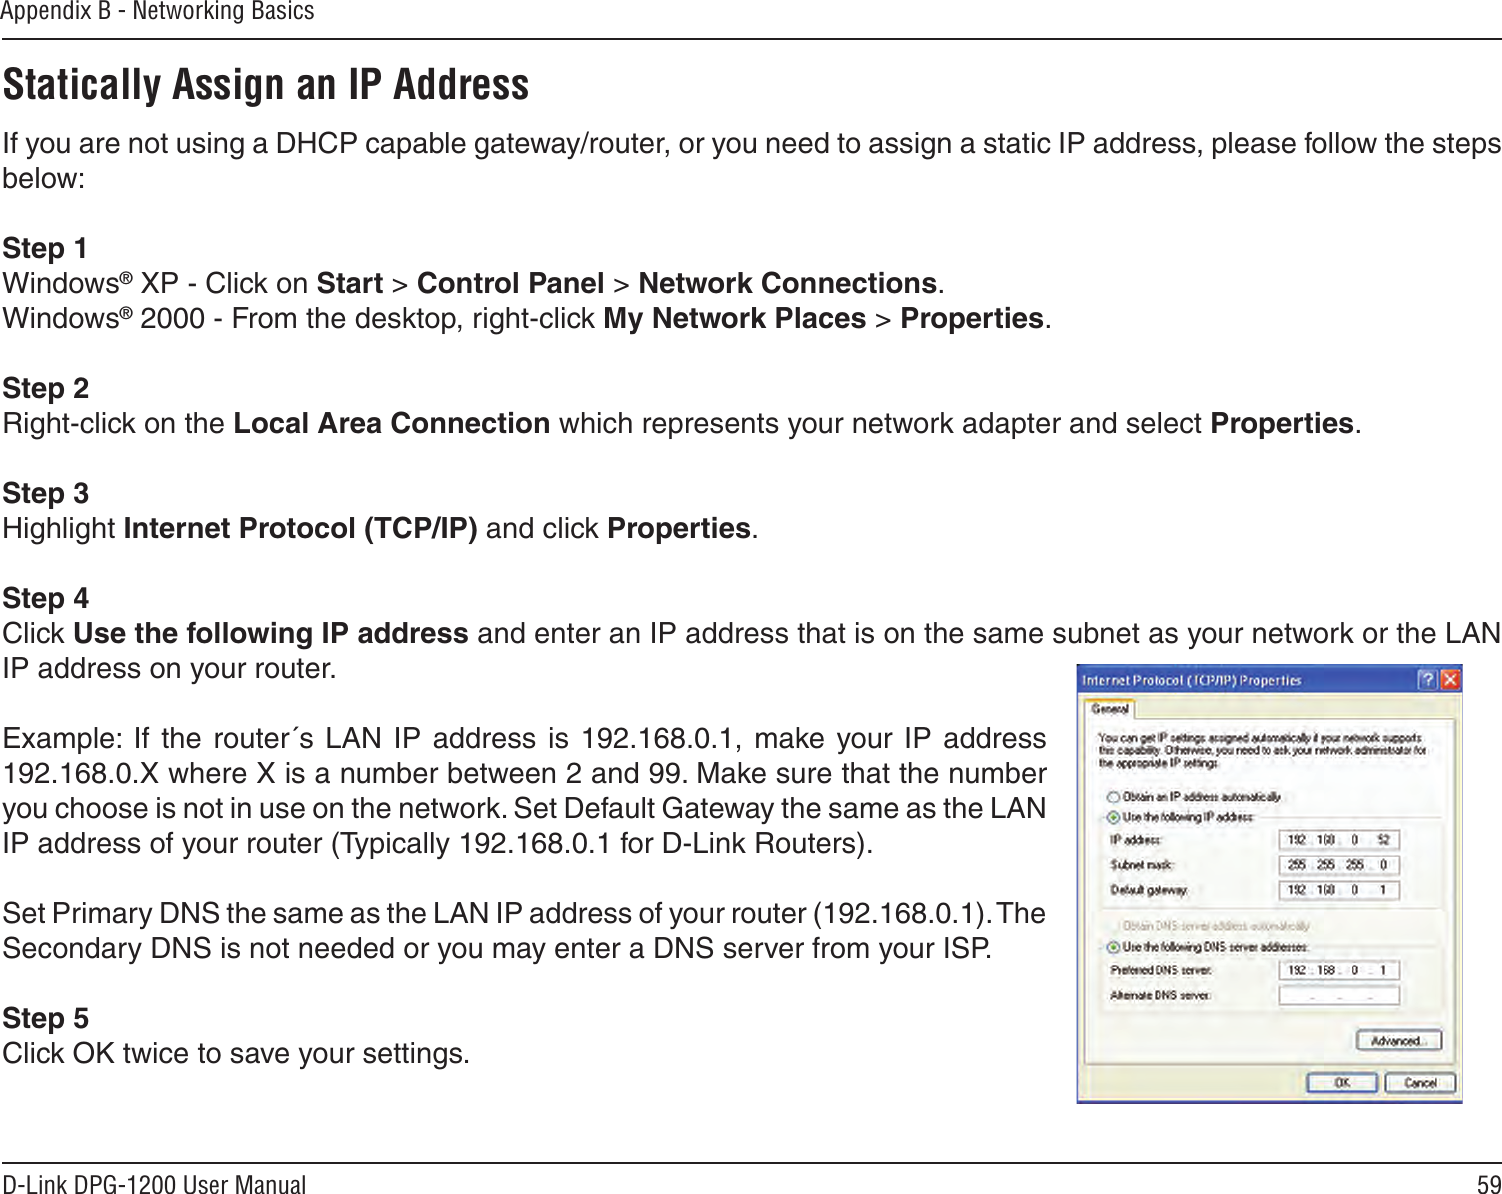 59D-Link DPG-1200 User ManualAppendix B - Networking BasicsStatically Assign an IP AddressIf you are not using a DHCP capable gateway/router, or you need to assign a static IP address, please follow the steps below:Step 1Windows® XP - Click on Start &gt; Control Panel &gt; Network Connections.Windows® 2000 - From the desktop, right-click My Network Places &gt; Properties.Step 2Right-click on the Local Area Connection which represents your network adapter and select Properties.Step 3Highlight Internet Protocol (TCP/IP) and click Properties.Step 4Click Use the following IP address and enter an IP address that is on the same subnet as your network or the LAN IP address on your router. Example:  If  the  router´s LAN  IP  address is  192.168.0.1,  make your  IP  address 192.168.0.X where X is a number between 2 and 99. Make sure that the number you choose is not in use on the network. Set Default Gateway the same as the LAN IP address of your router (Typically 192.168.0.1 for D-Link Routers). Set Primary DNS the same as the LAN IP address of your router (192.168.0.1). The Secondary DNS is not needed or you may enter a DNS server from your ISP.Step 5Click OK twice to save your settings.